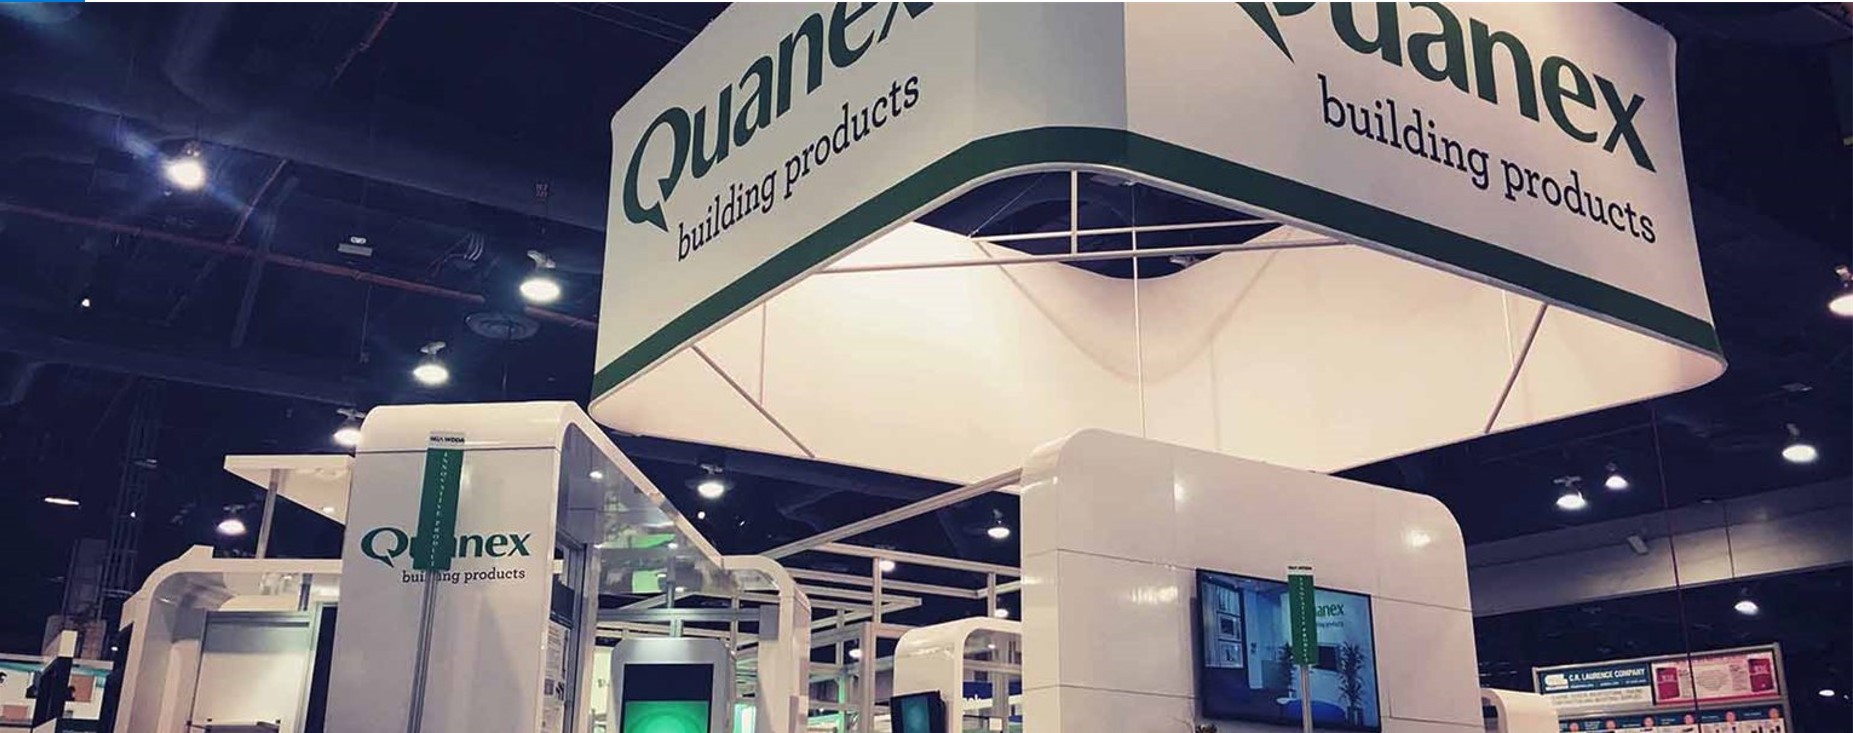 Quantex displays and advertises its services in a customized kiosk at an exhibition.